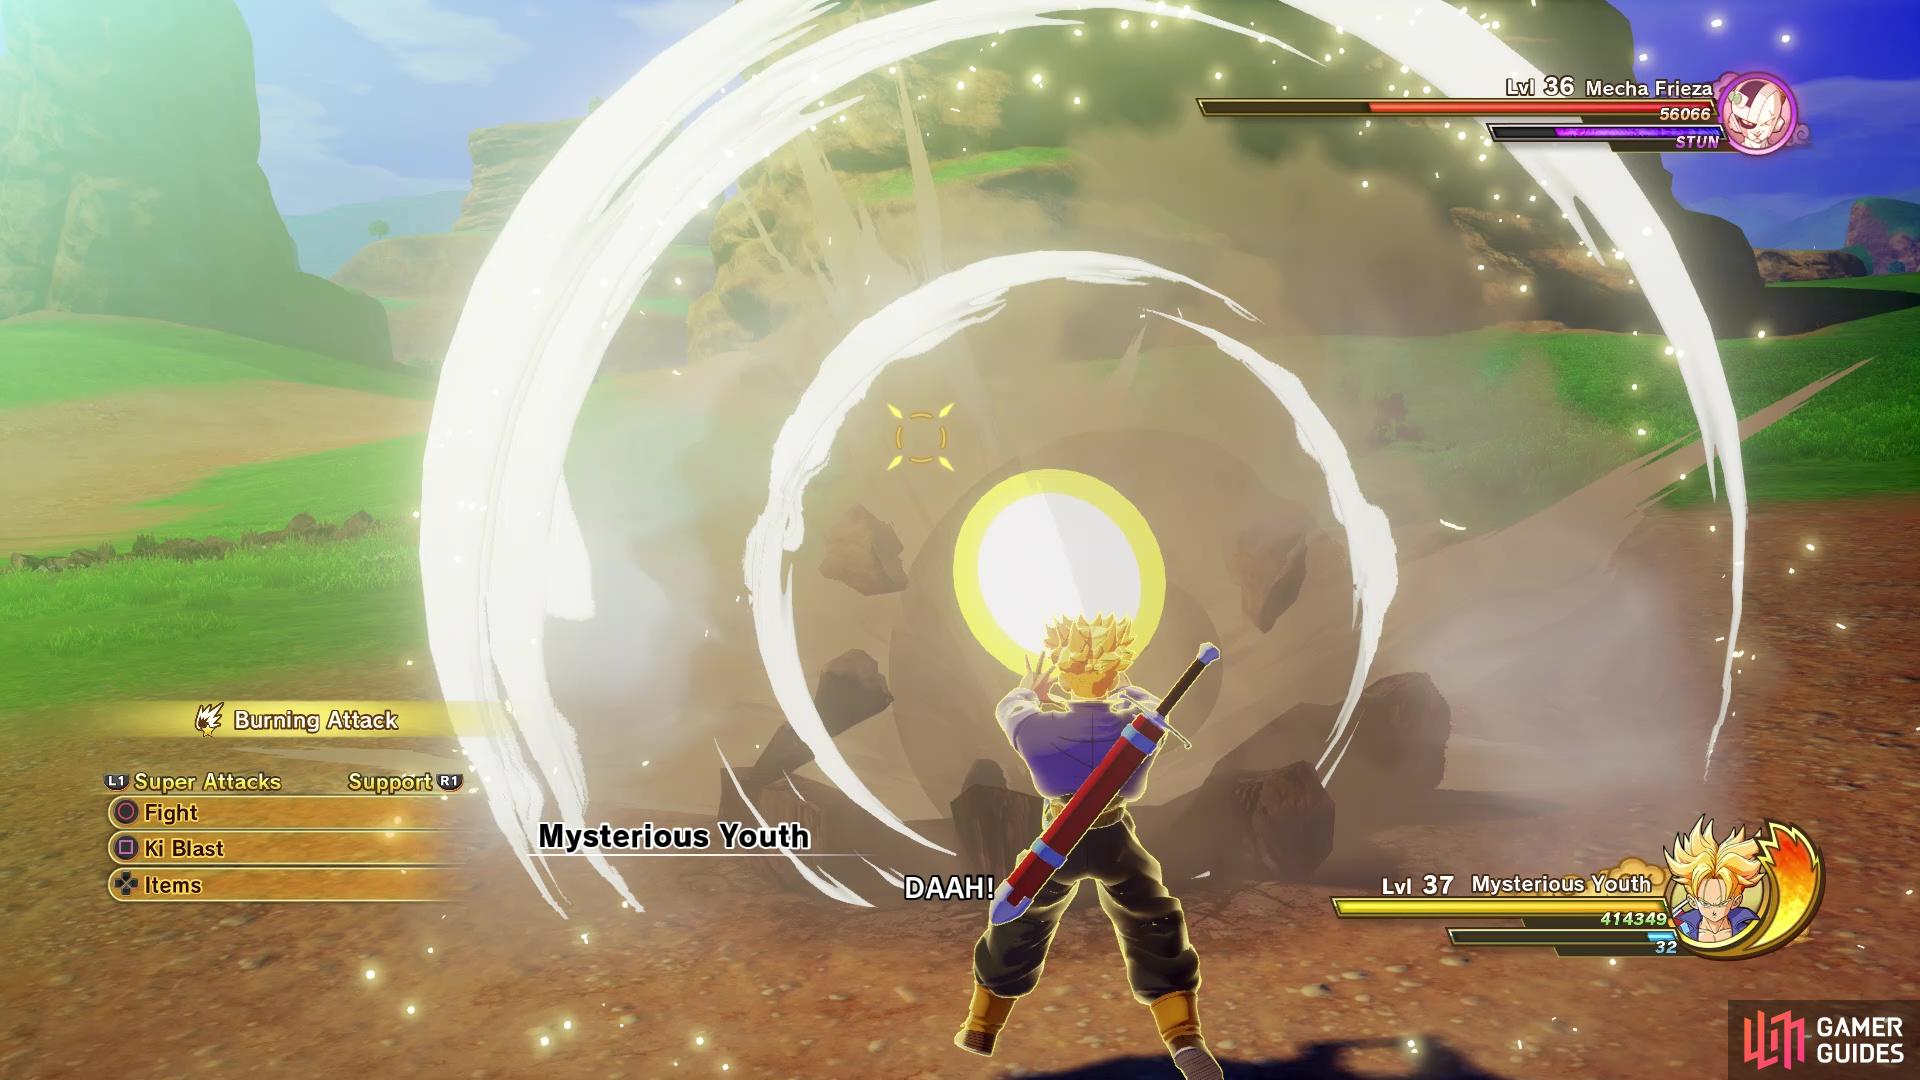 Burning Attack will knock off a good chunk of Frieza's health